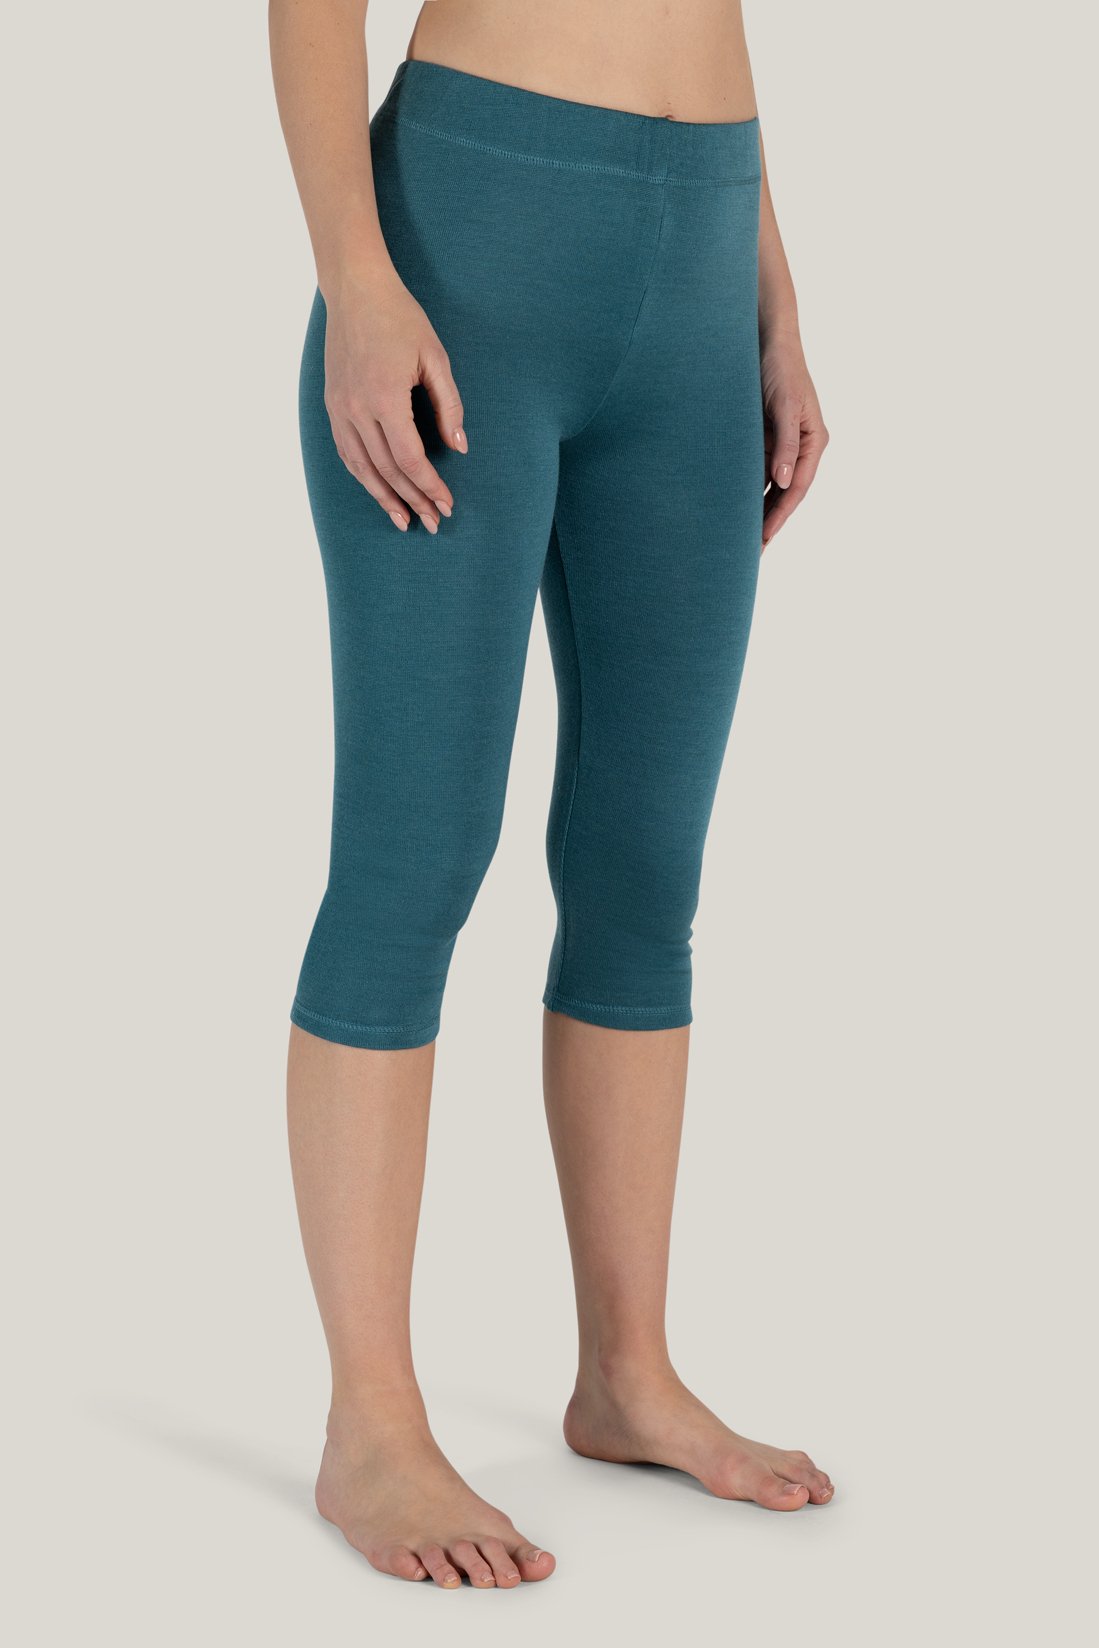 Shop Yoga clothing sets for women. Exclusively at BSA. Find our yoga pants, yoga  tops, high quality yoga outfit, high quality yoga outfit.